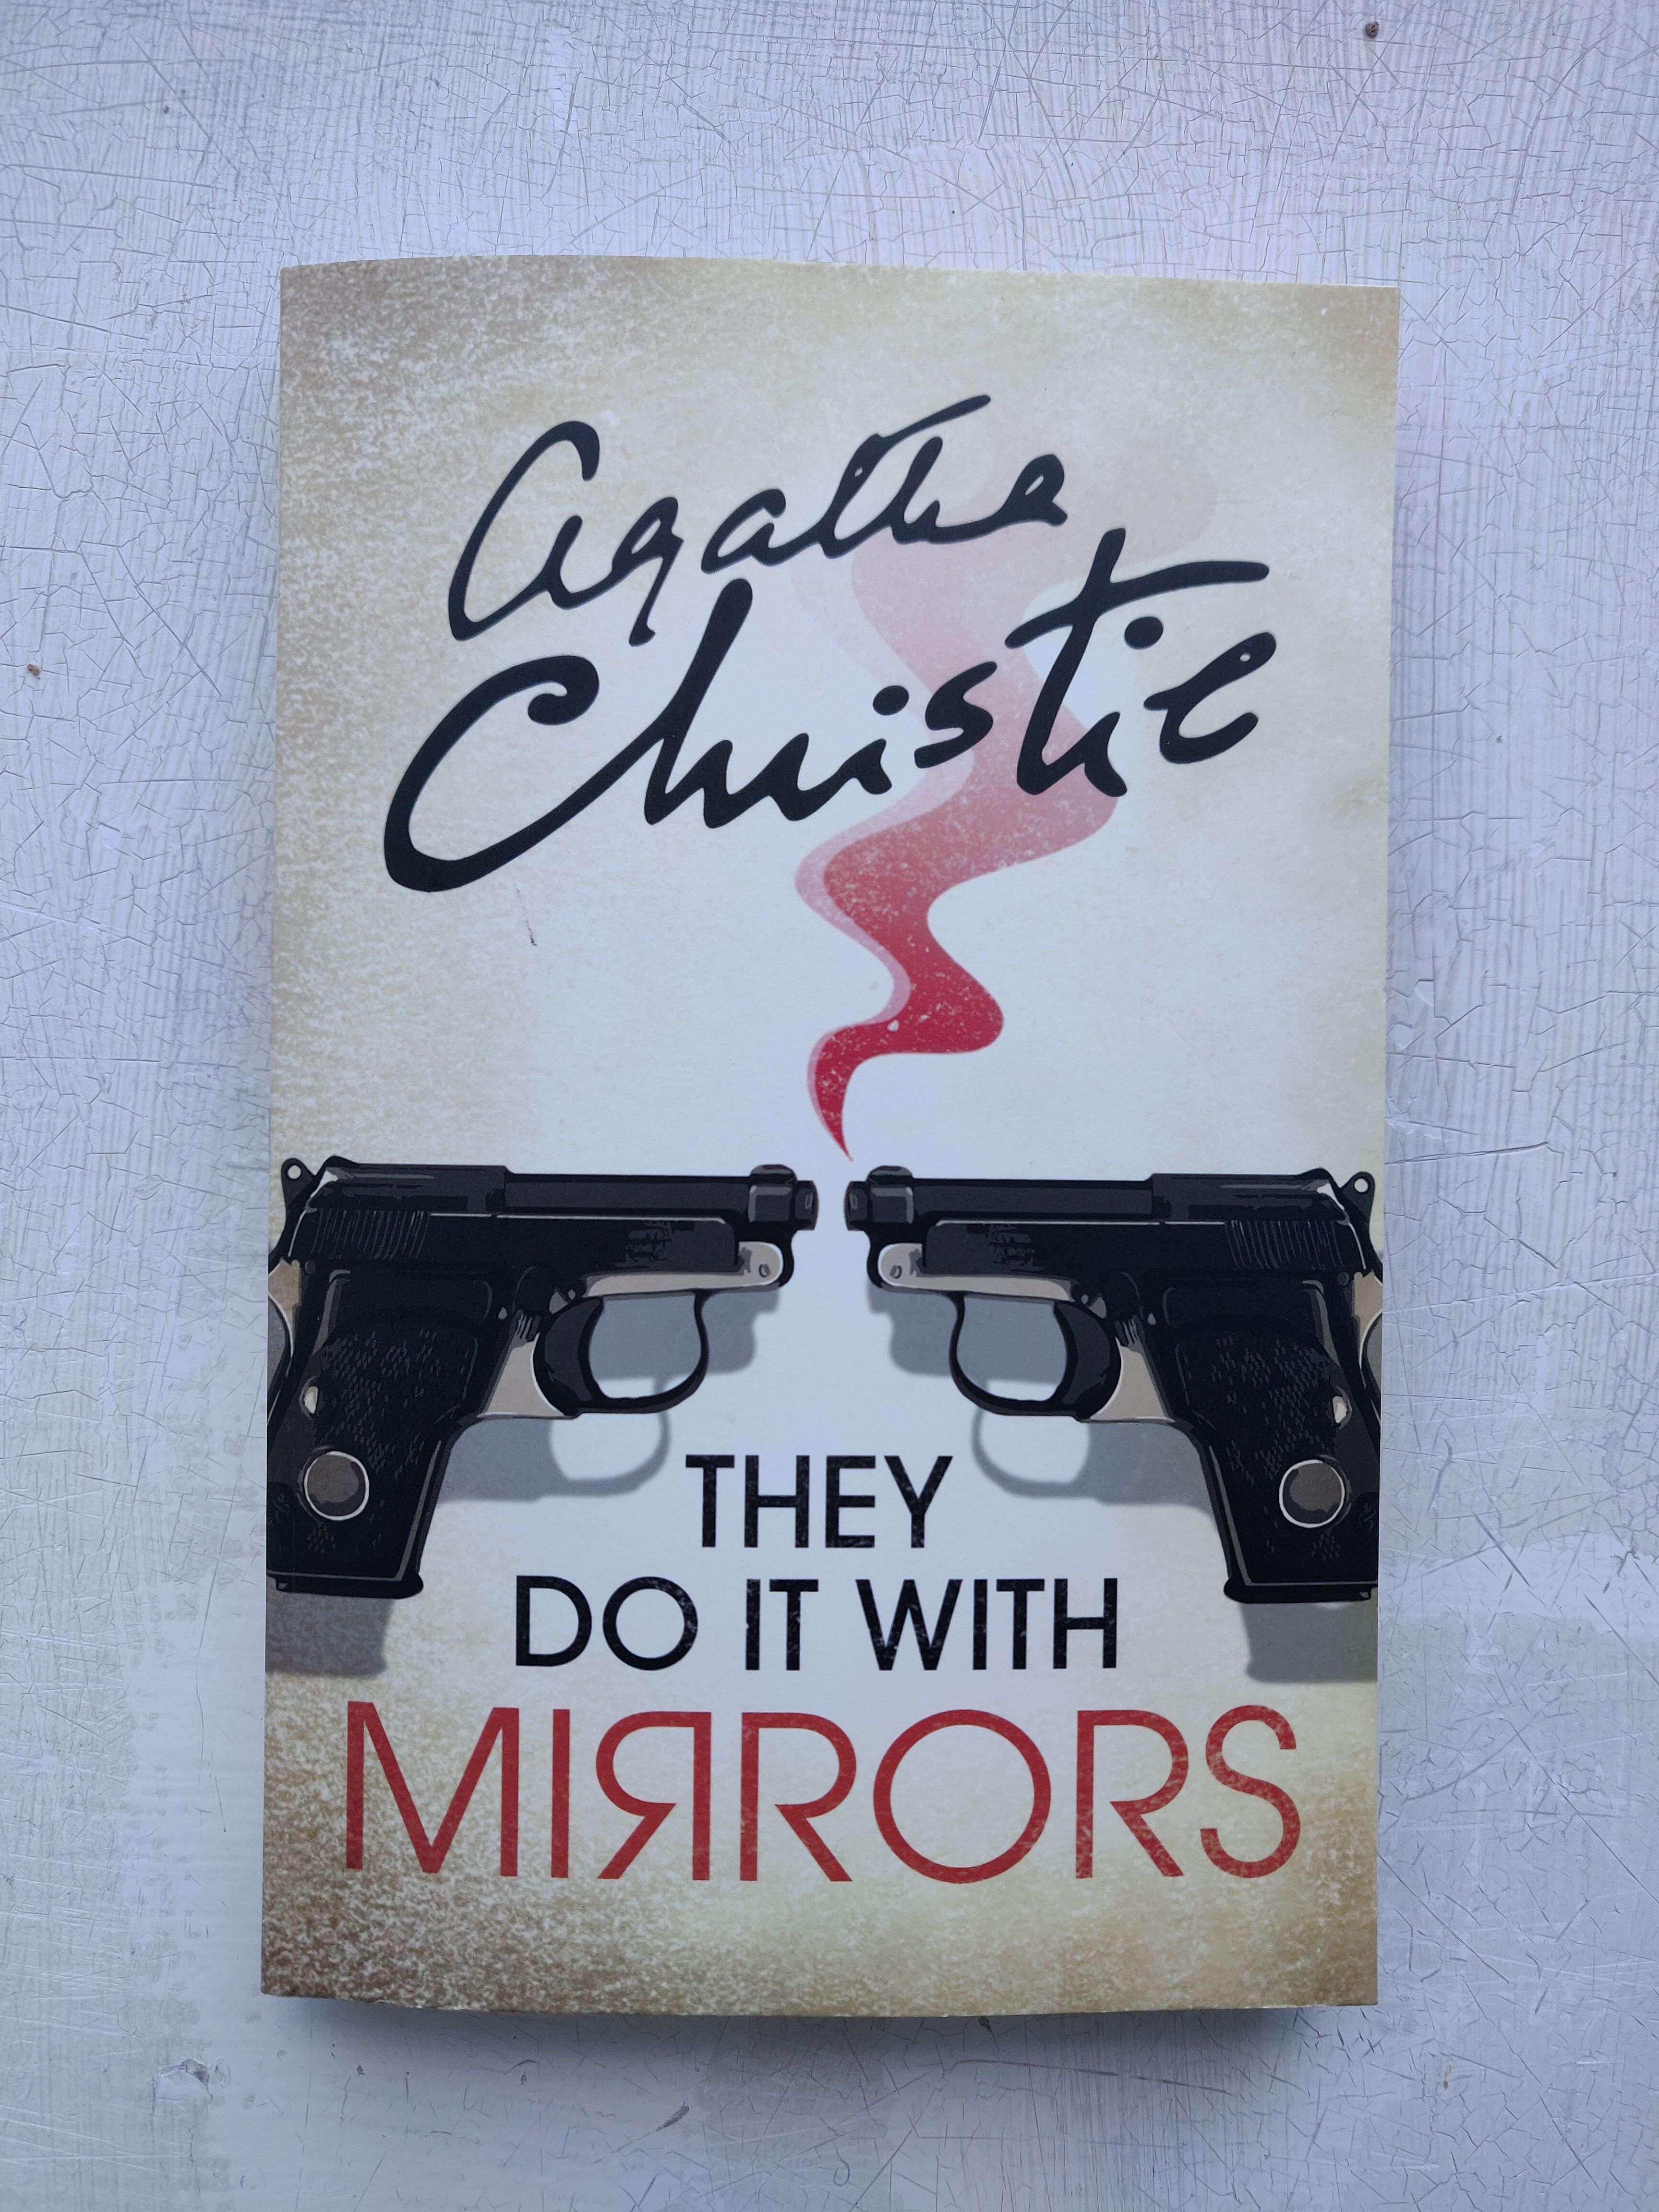 They Do It With Mirrors by Agatha Christie